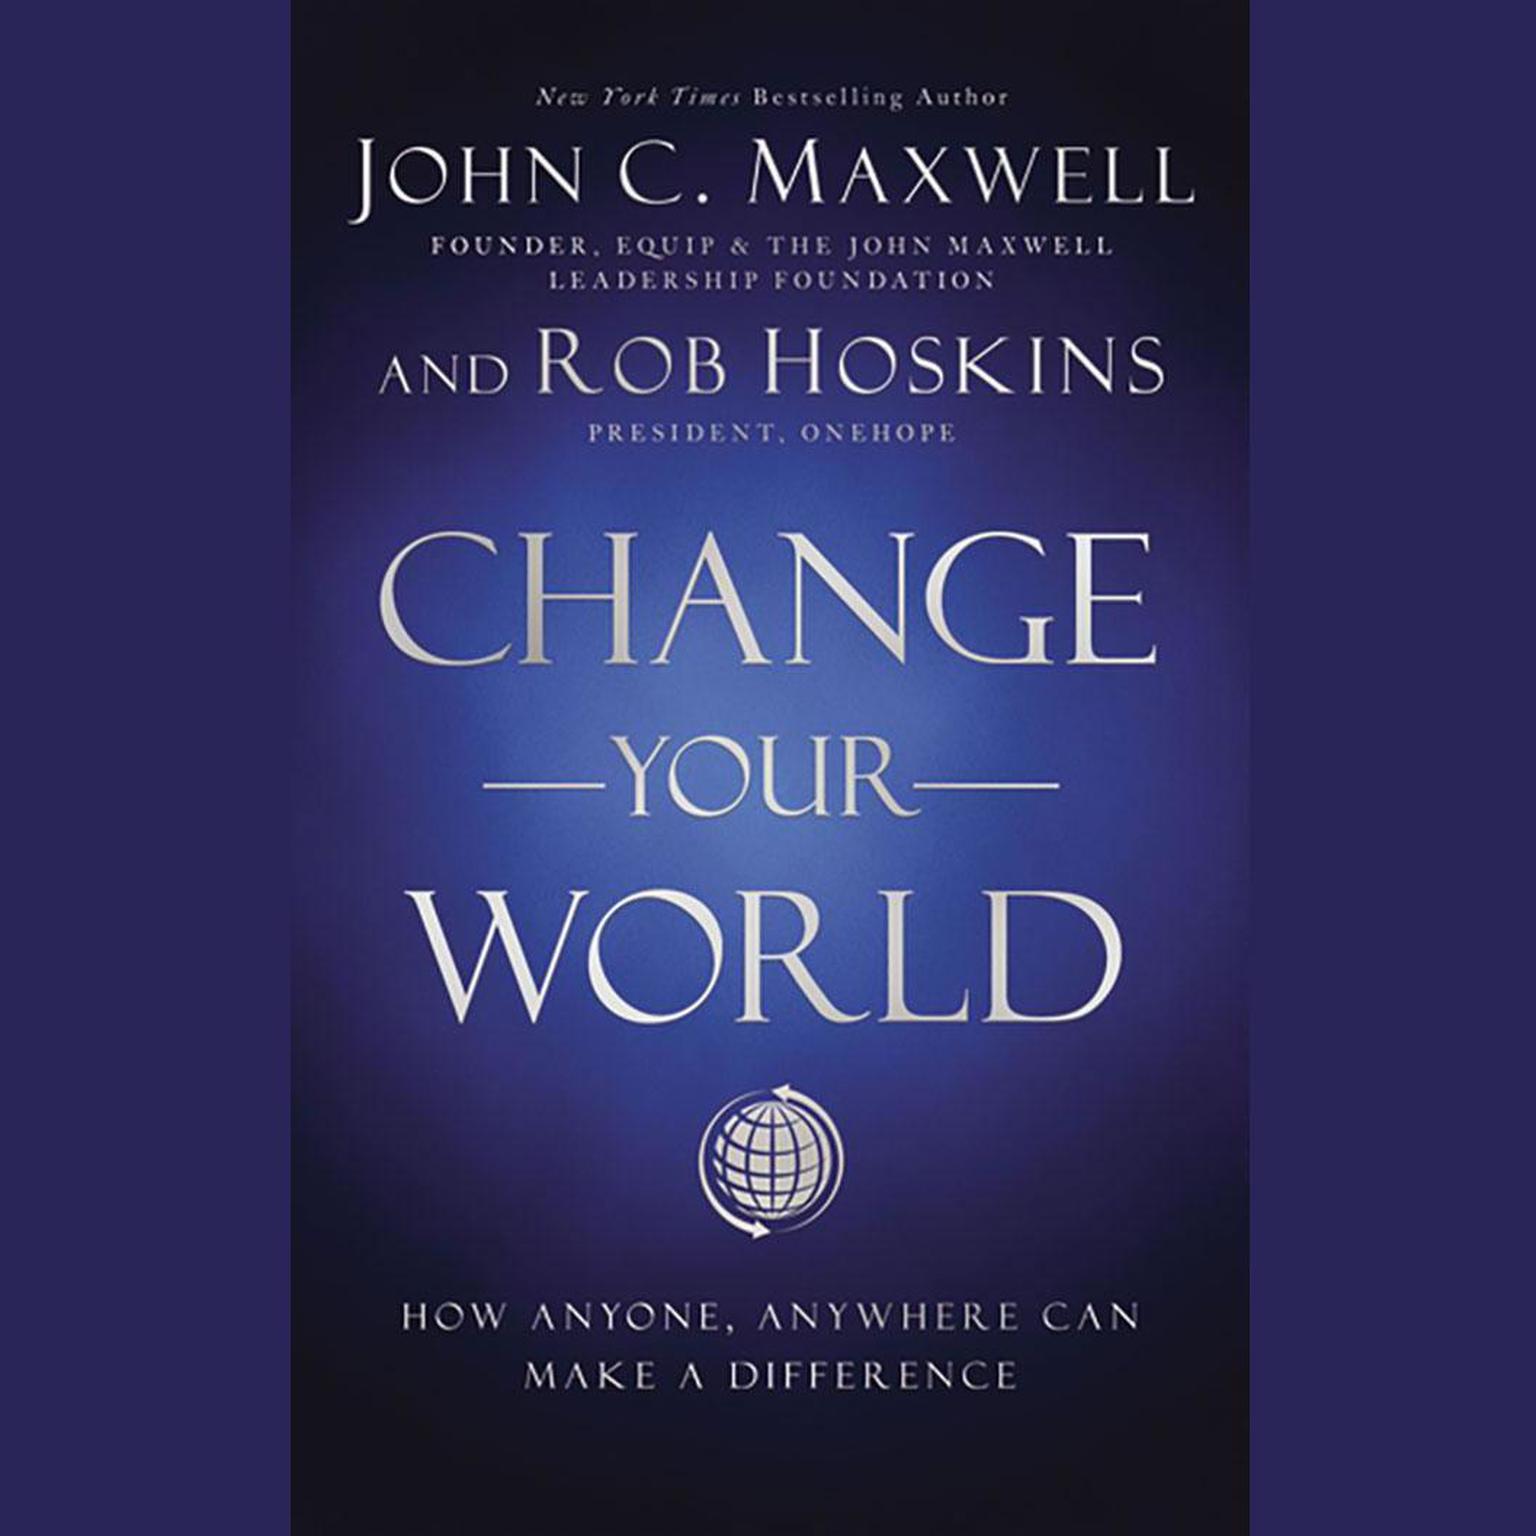 Change Your World: How Anyone, Anywhere Can Make a Difference Audiobook, by John C. Maxwell